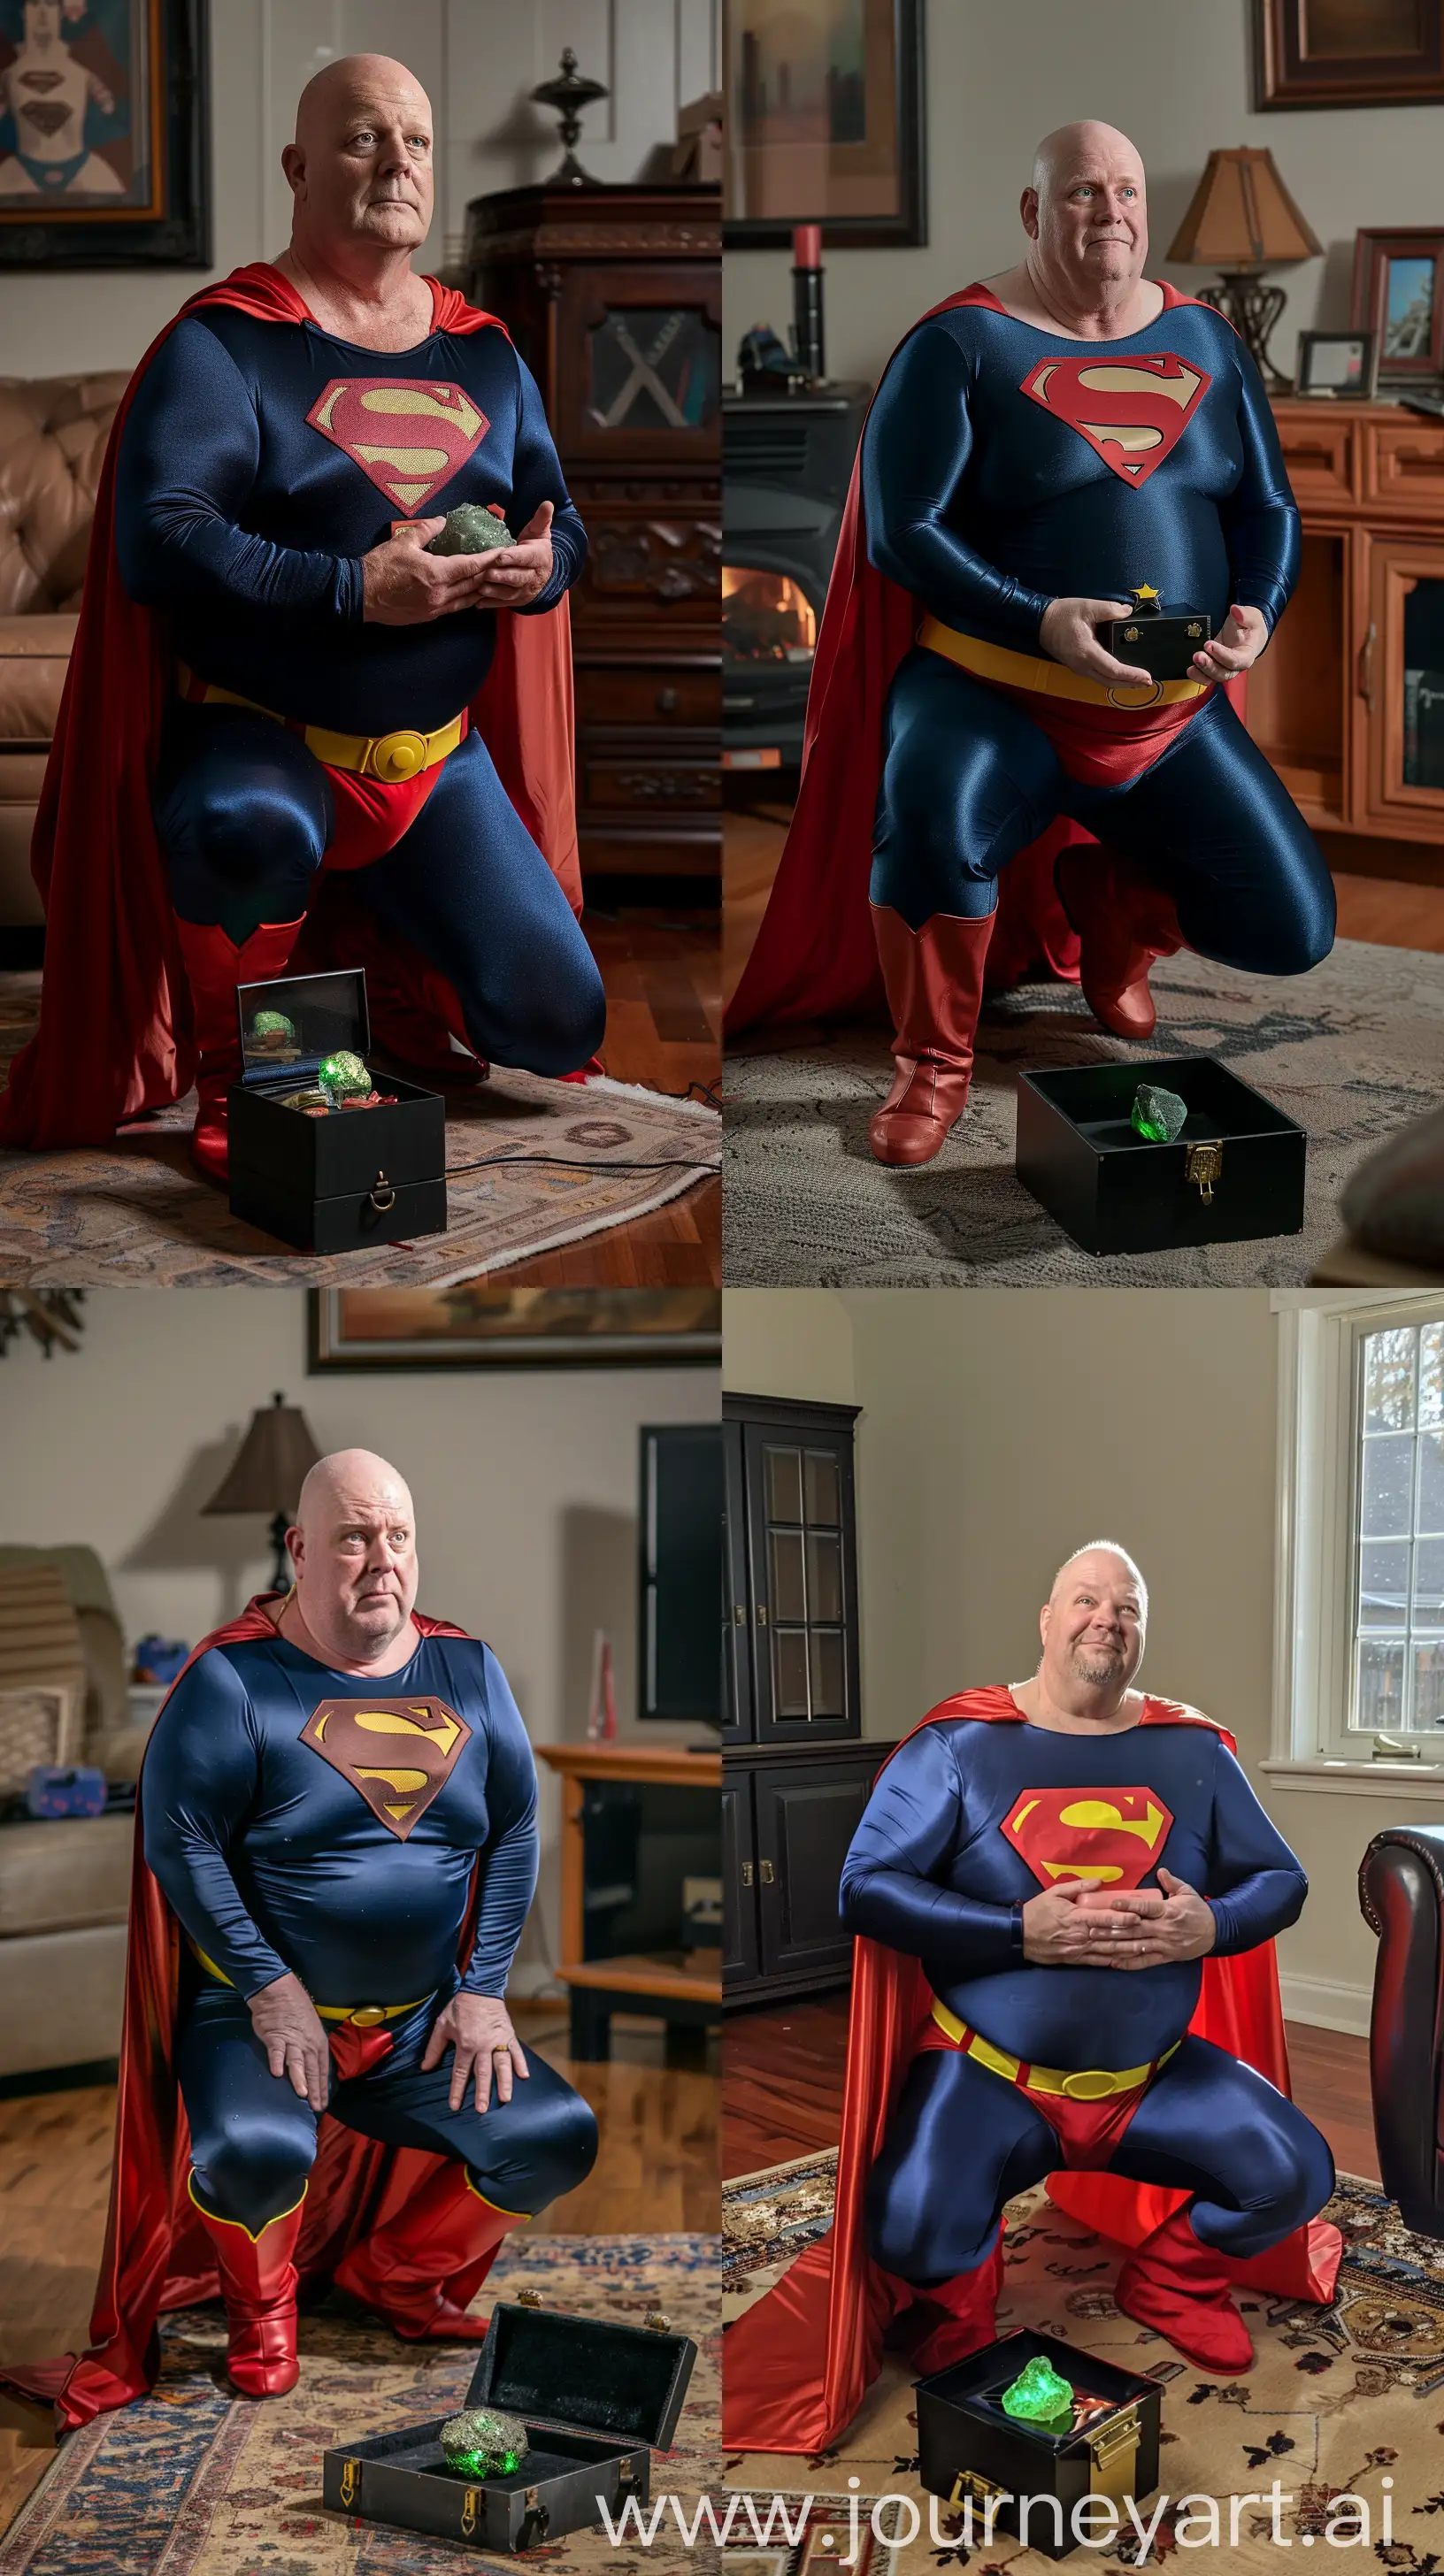 Front close-up photo of a fat man aged 60 wearing silk navy blue complete superman tight uniform with a large red cape, red trunks, yellow belt, red boots. Kneeling in front of an opened small black metal box containing a small green glowing rock. Inside a living room. Bald. Clean Shaven. Natural light. --ar 9:16